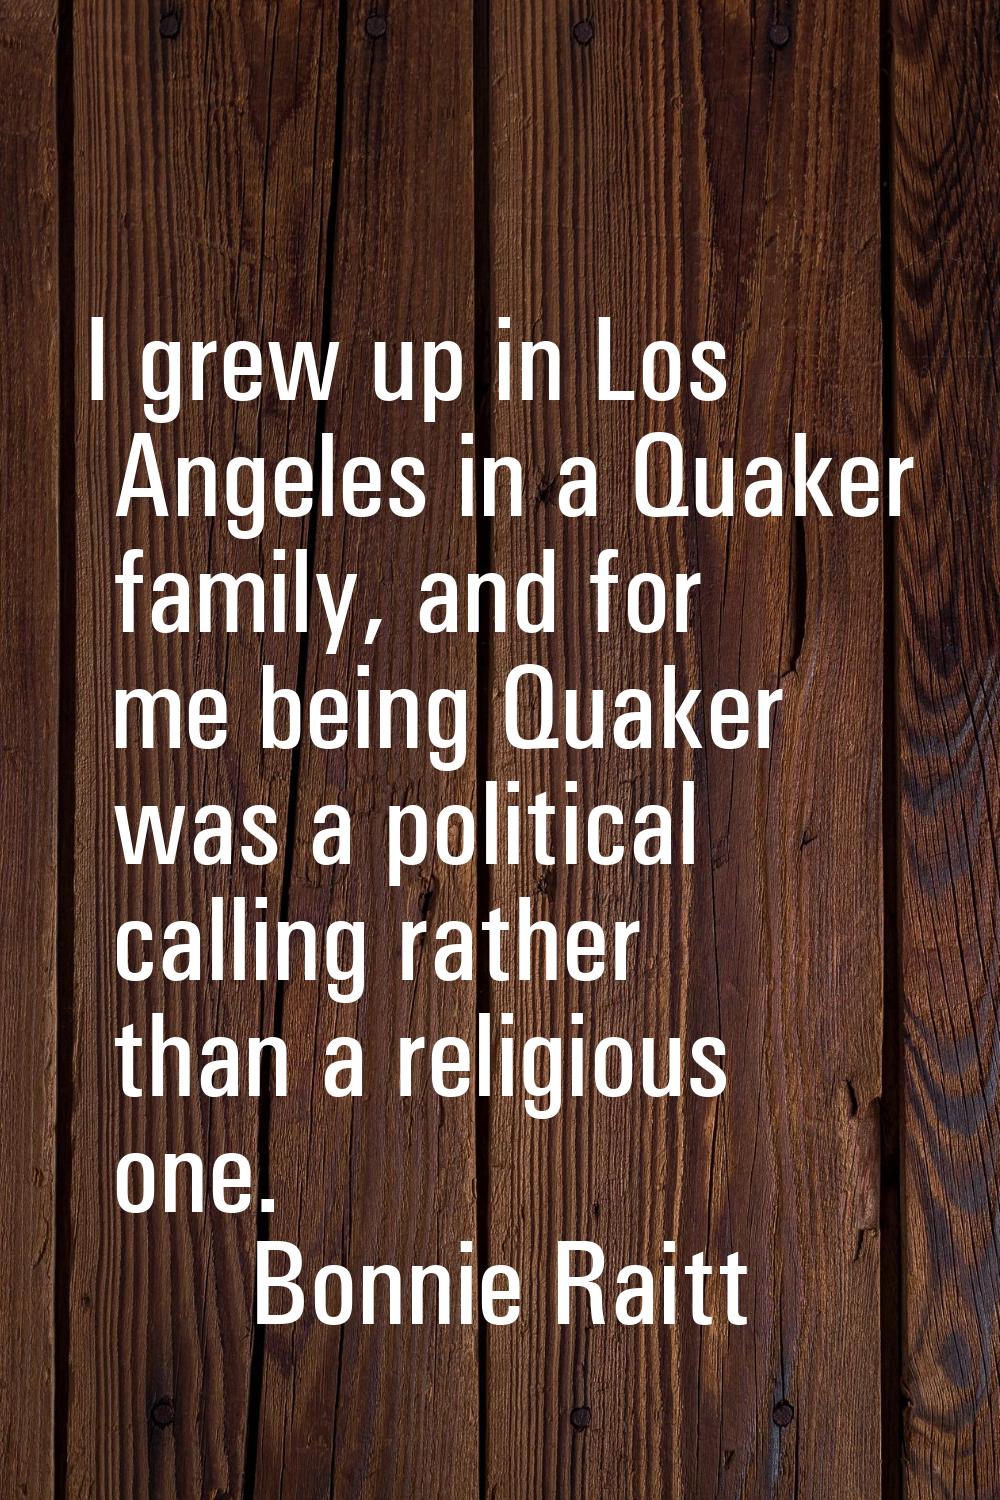 I grew up in Los Angeles in a Quaker family, and for me being Quaker was a political calling rather